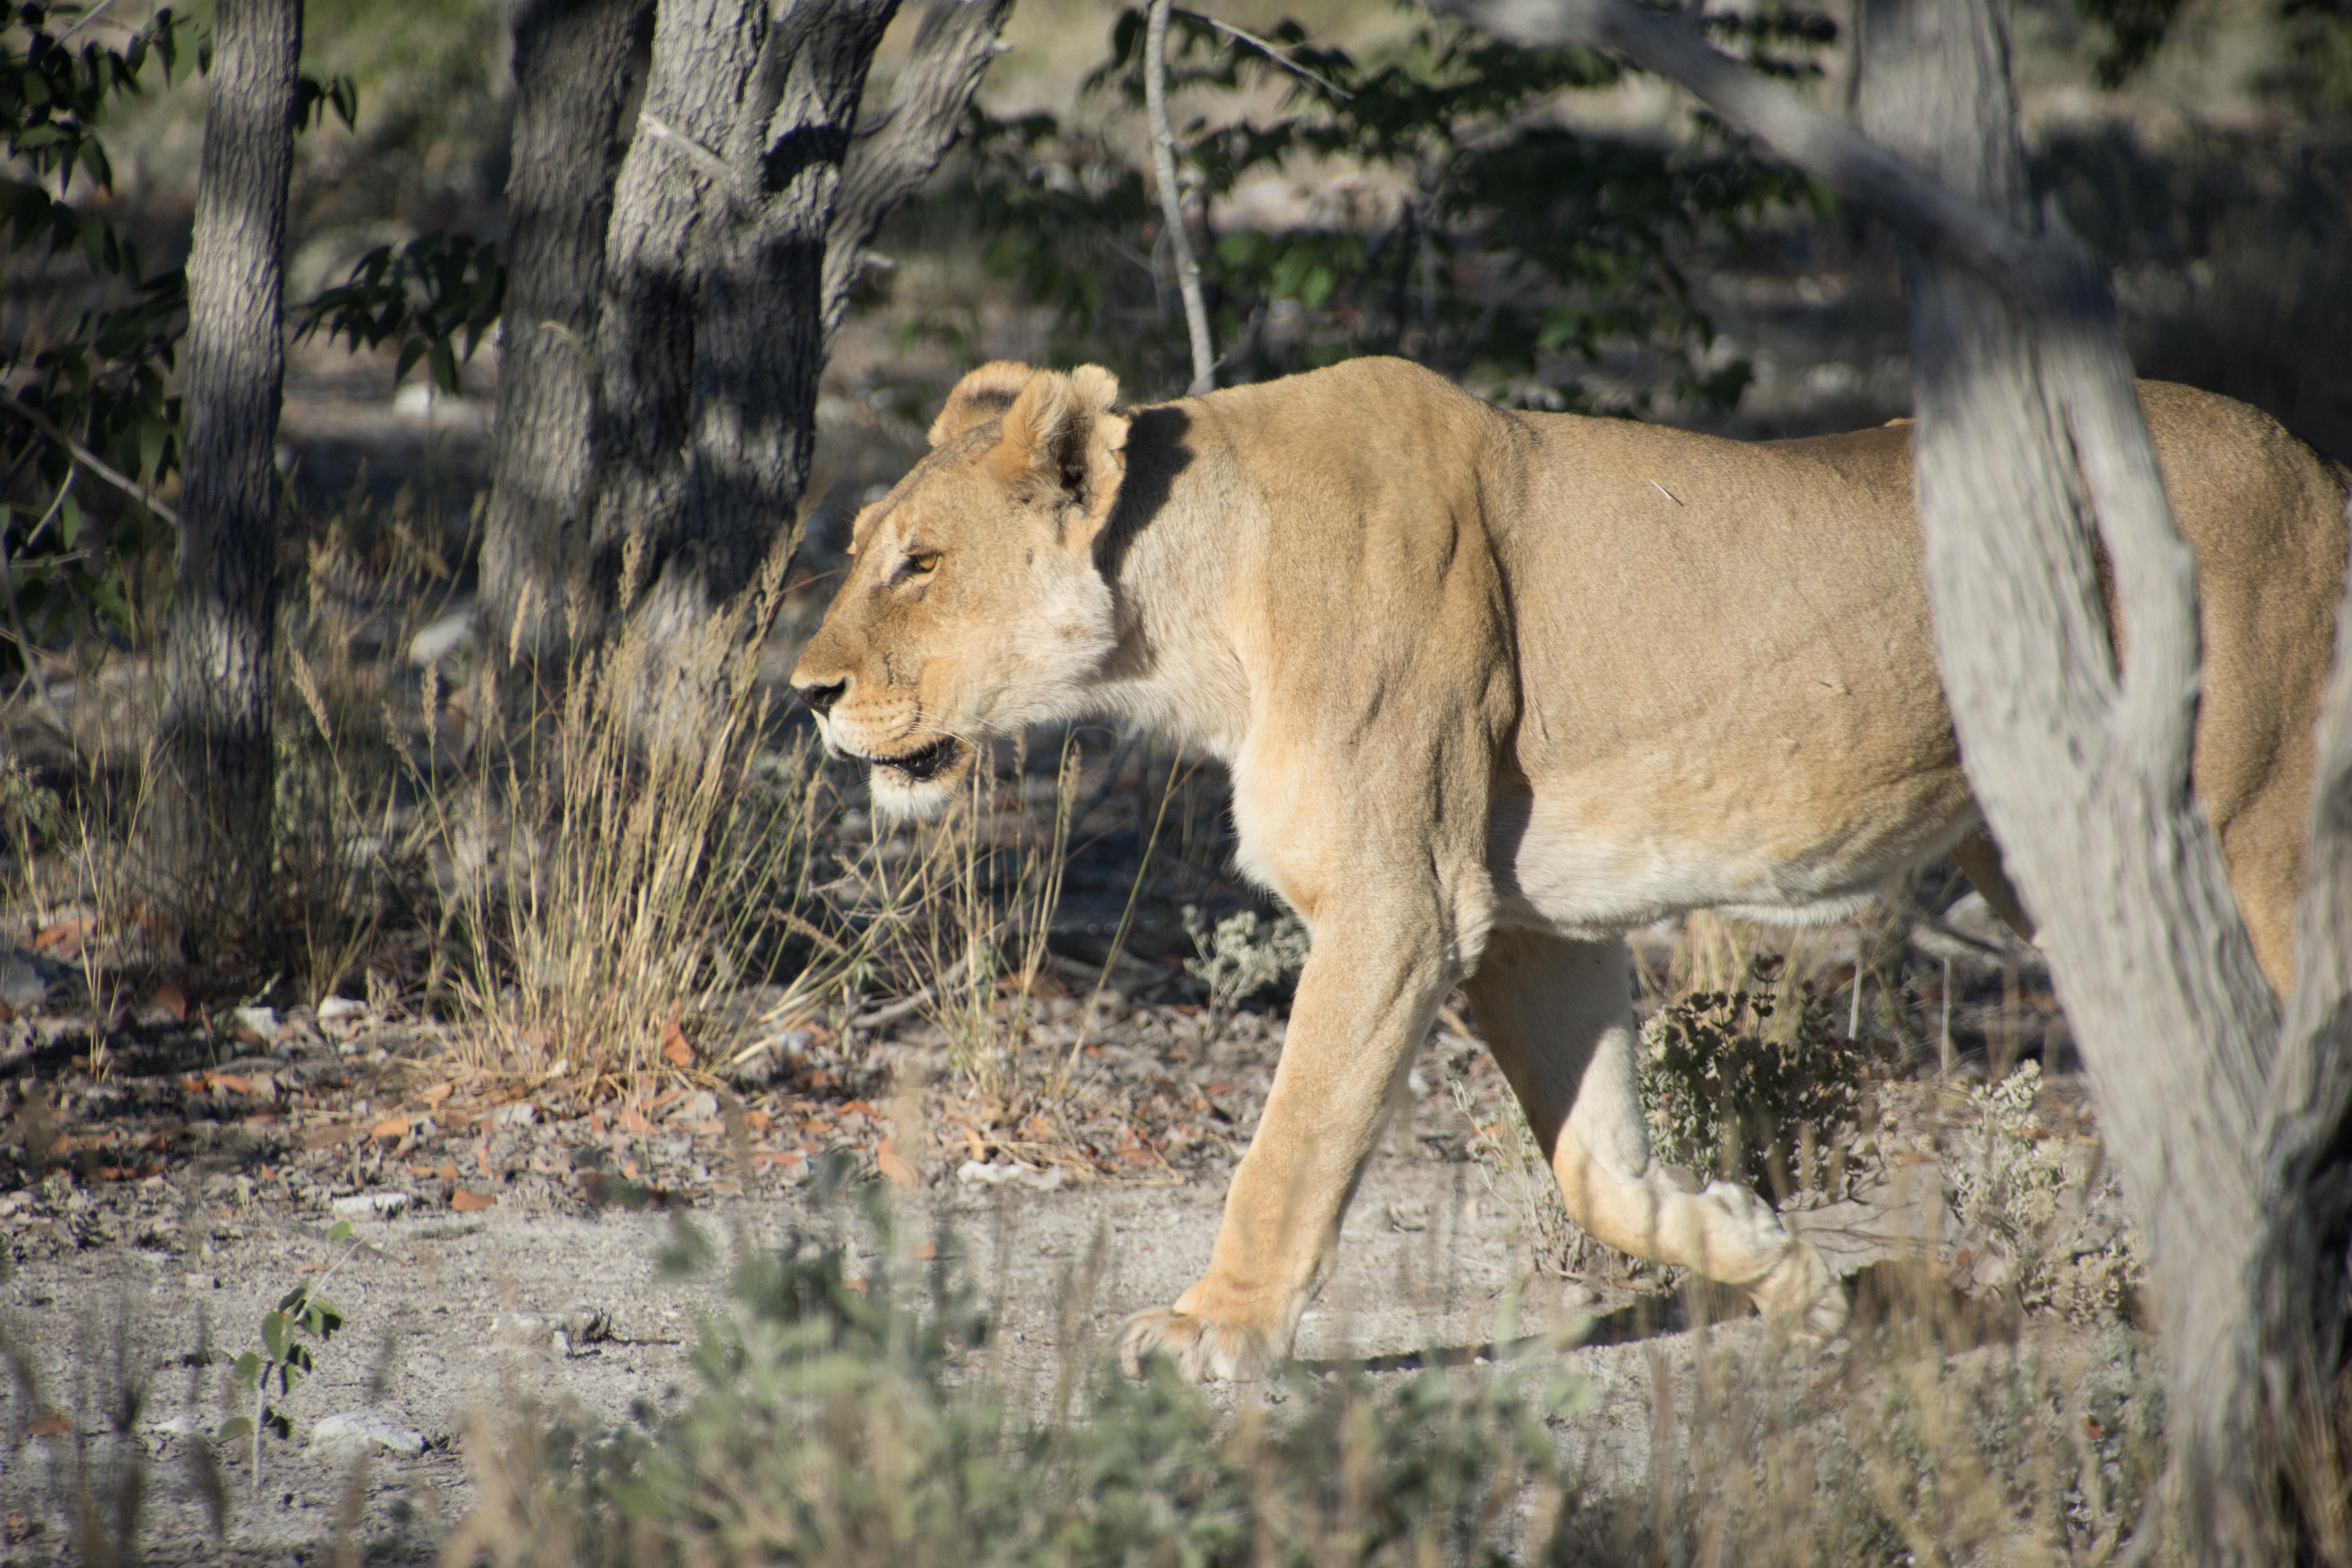 A lioness on the prowl. We were thankful to see her from the safety of a car rather than risking meeting her on our bicycles as we did in Tanzania and Botswana